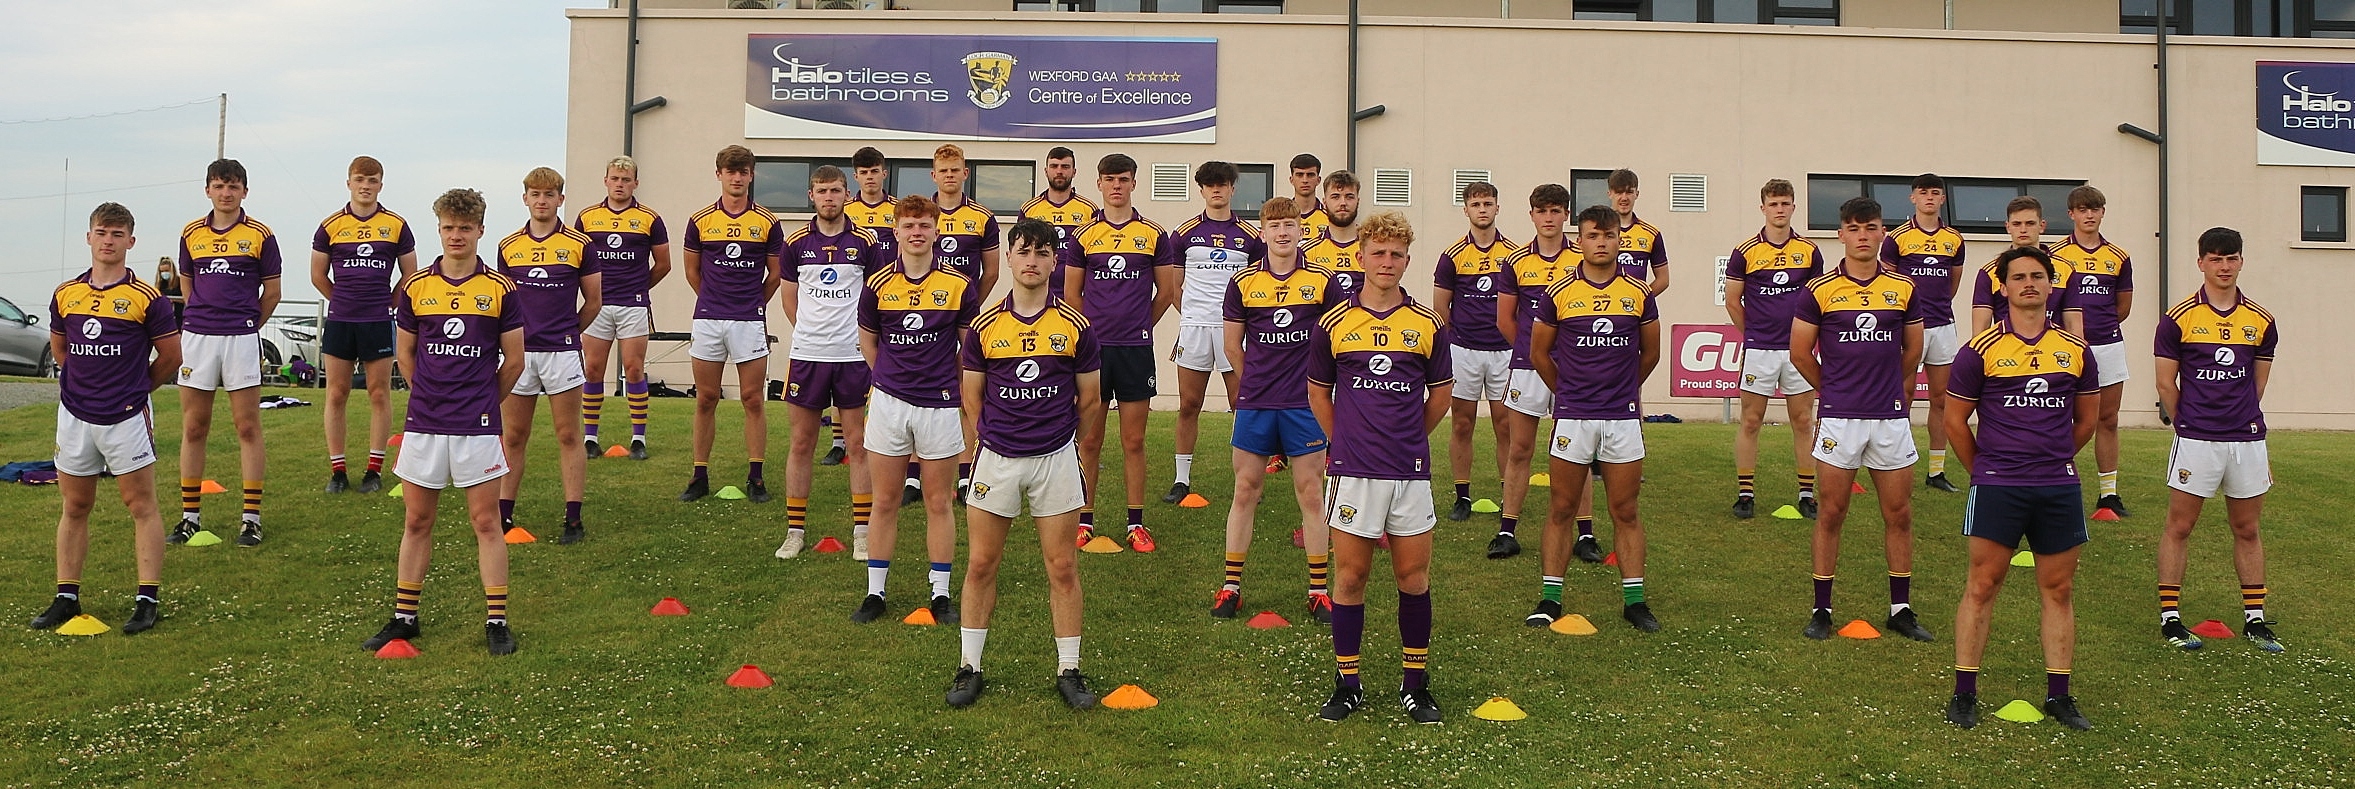 Wexford U-20 Footballers Kick start a big weekend of Wexford GAA as they take on Carlow in Round 1 of the Eirgrid Under 20 Football Championship